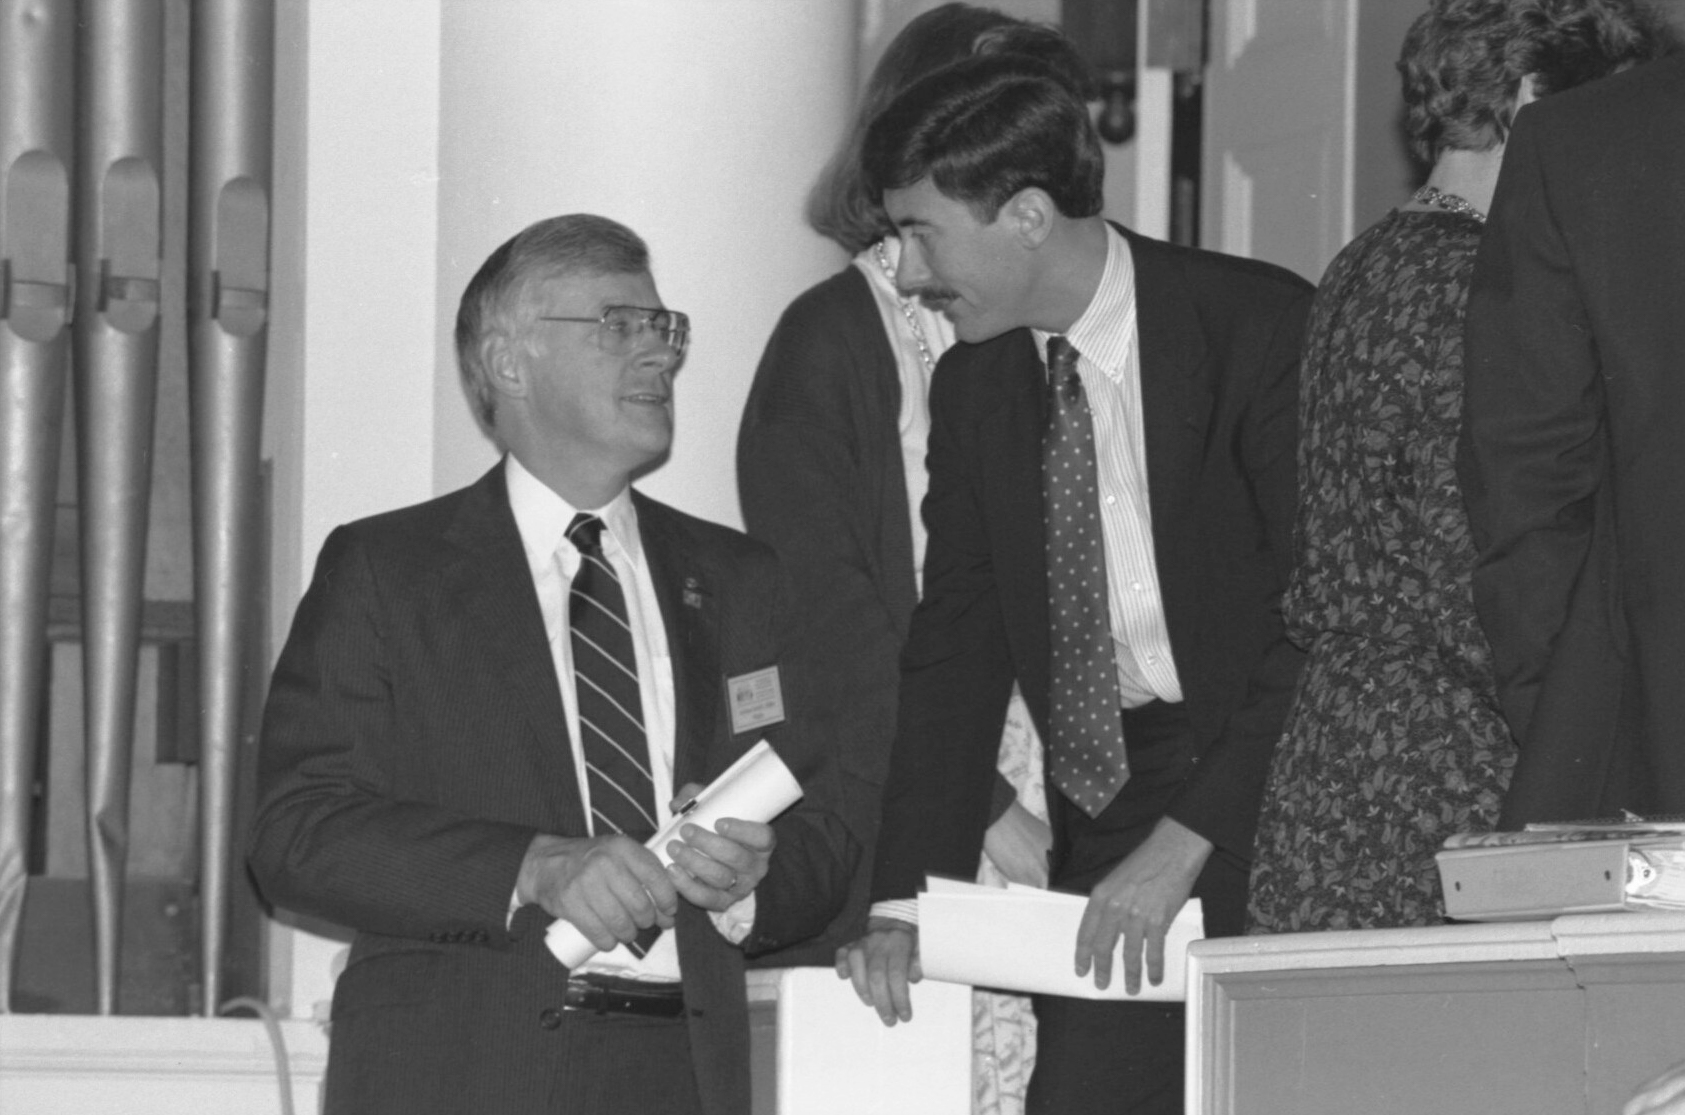 Black and White image of Larry Sabato, right, Gerald Baliles, left talking